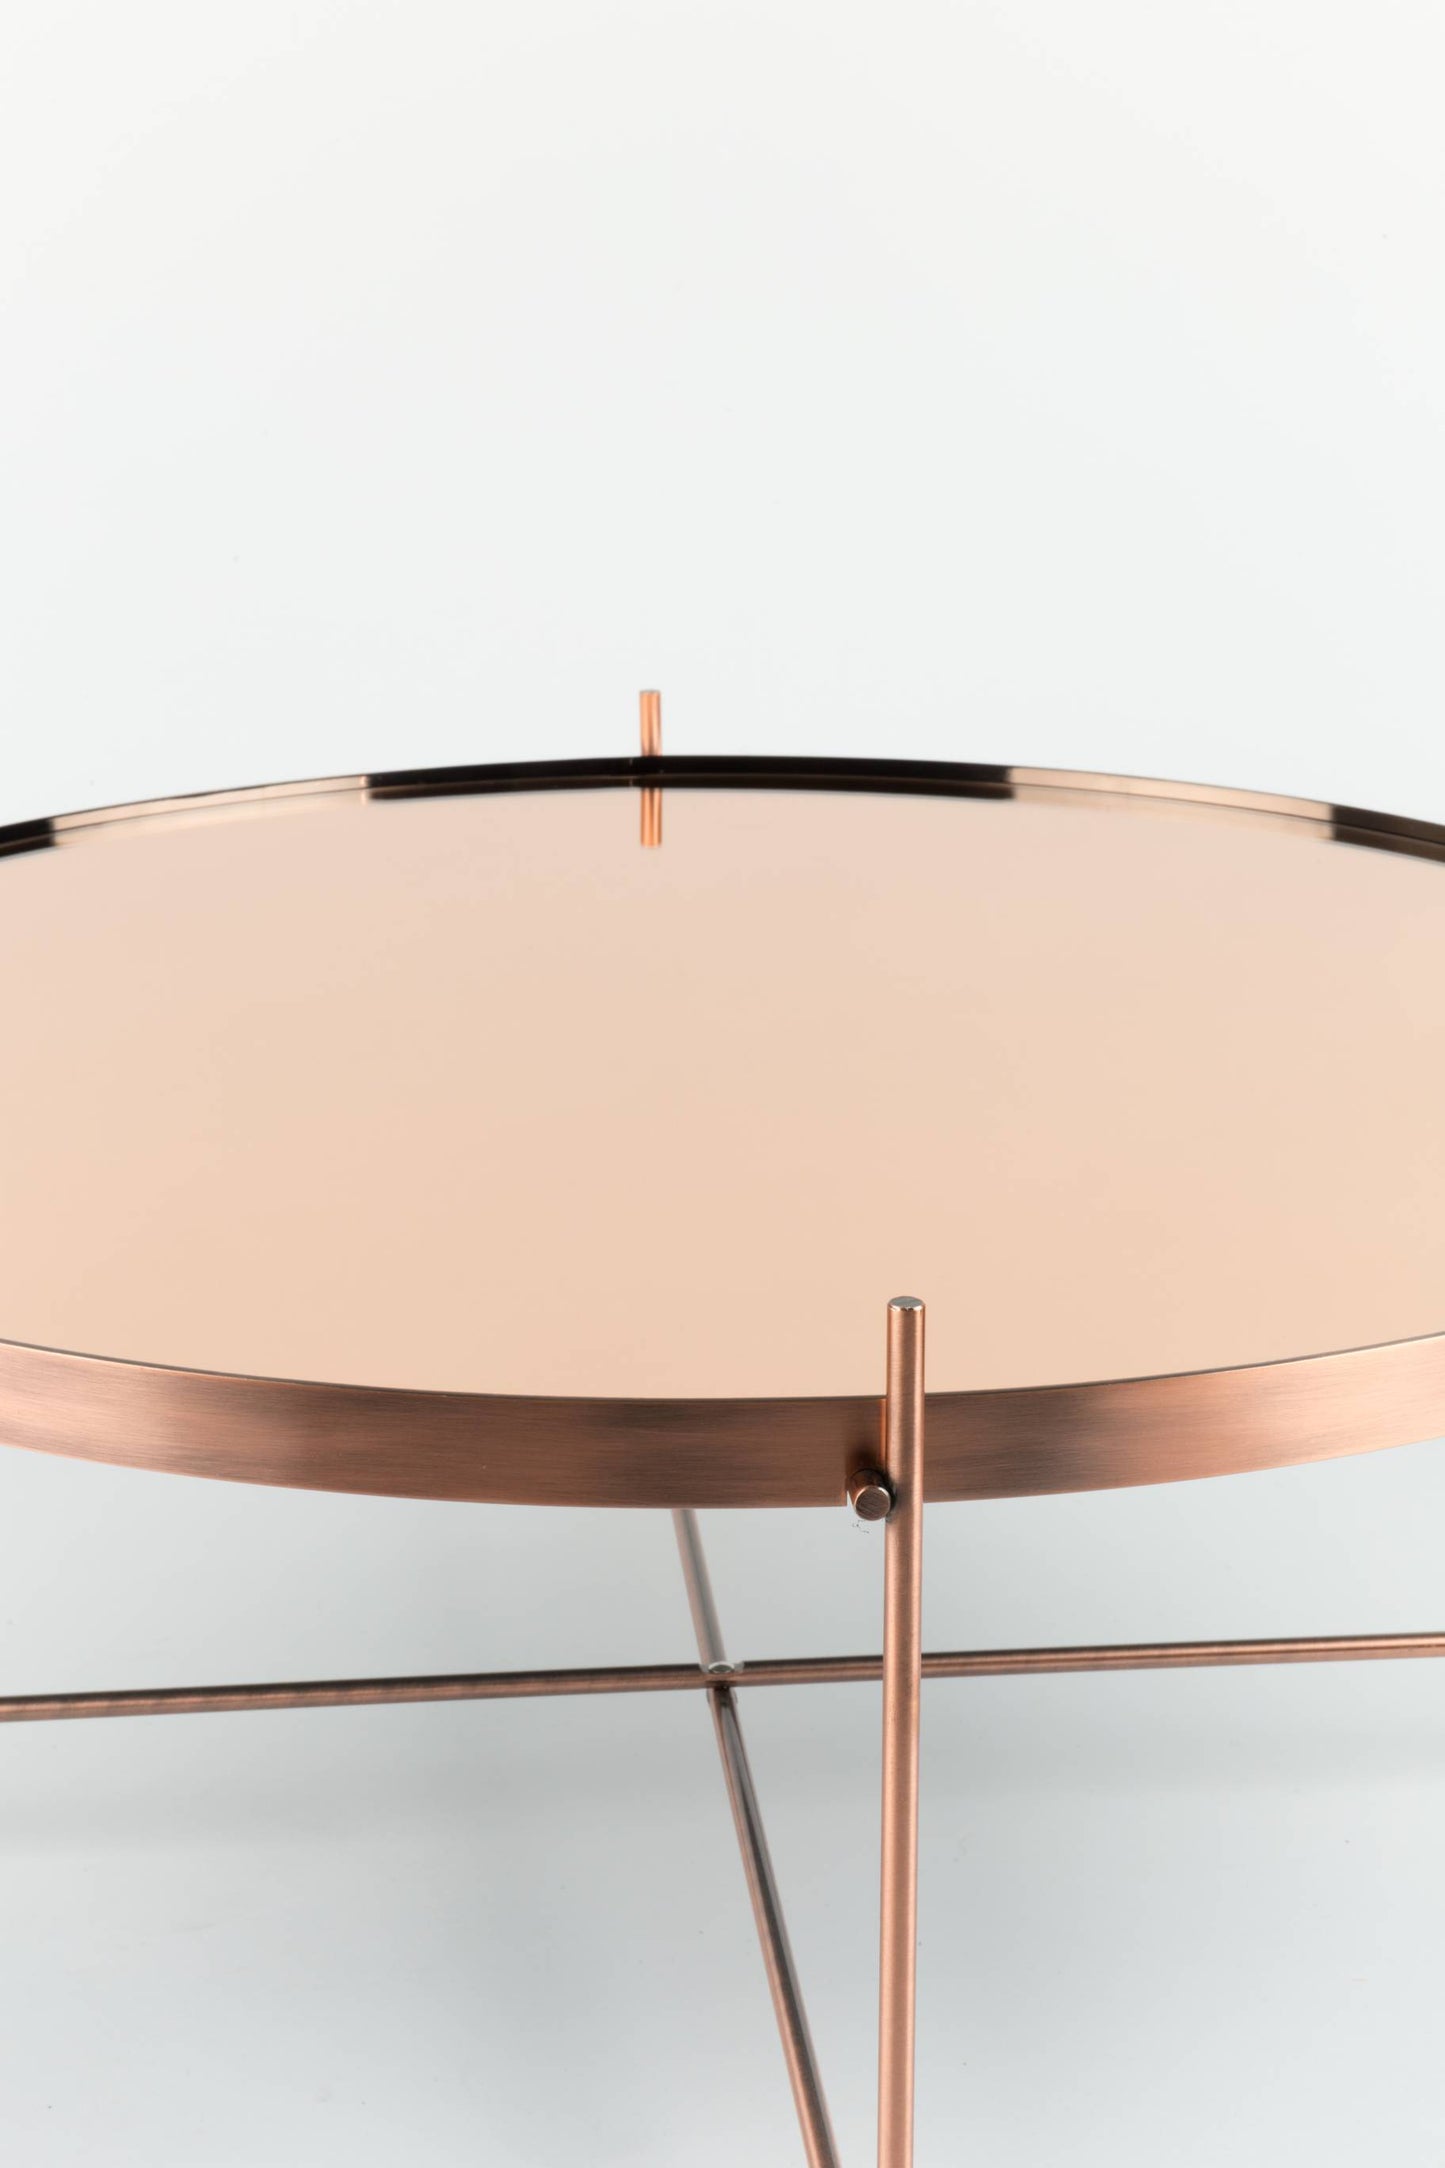 Zuiver | SIDE TABLE CUPID LARGE COPPER Default Title